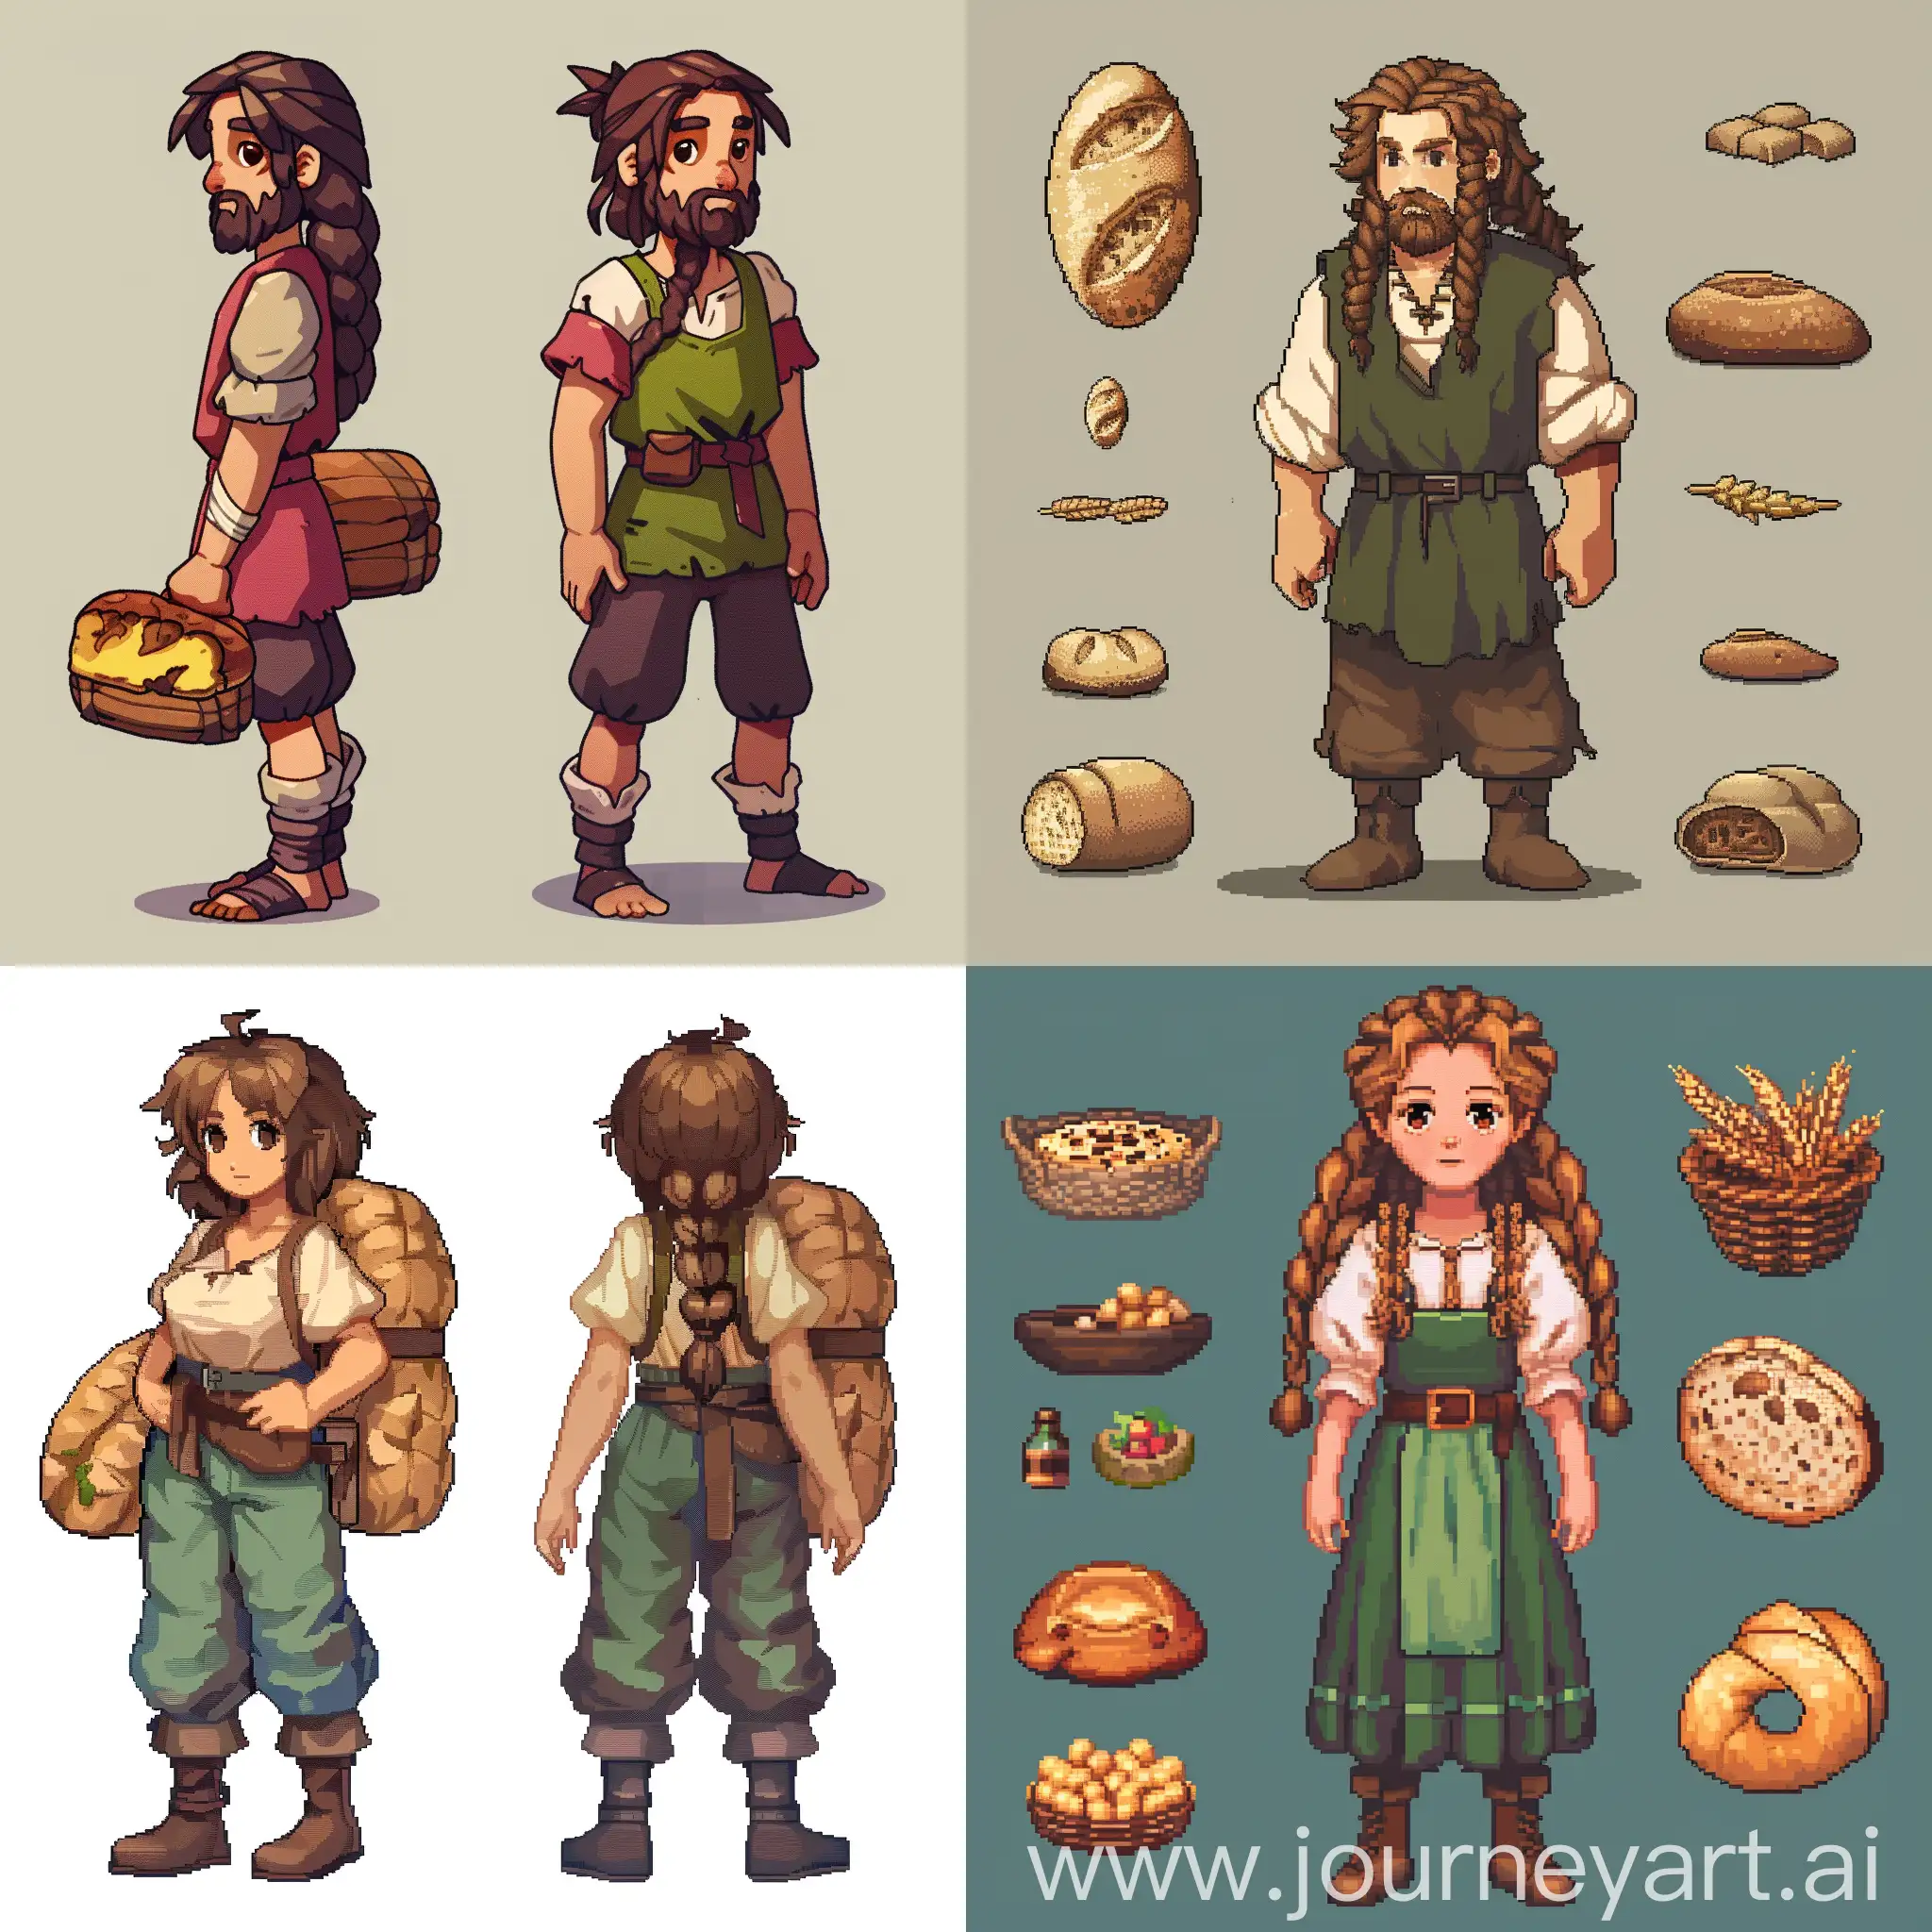 Pixel-Art-Villager-with-Long-Hair-Holding-Bread-Game-Sprite-Sheet-Design